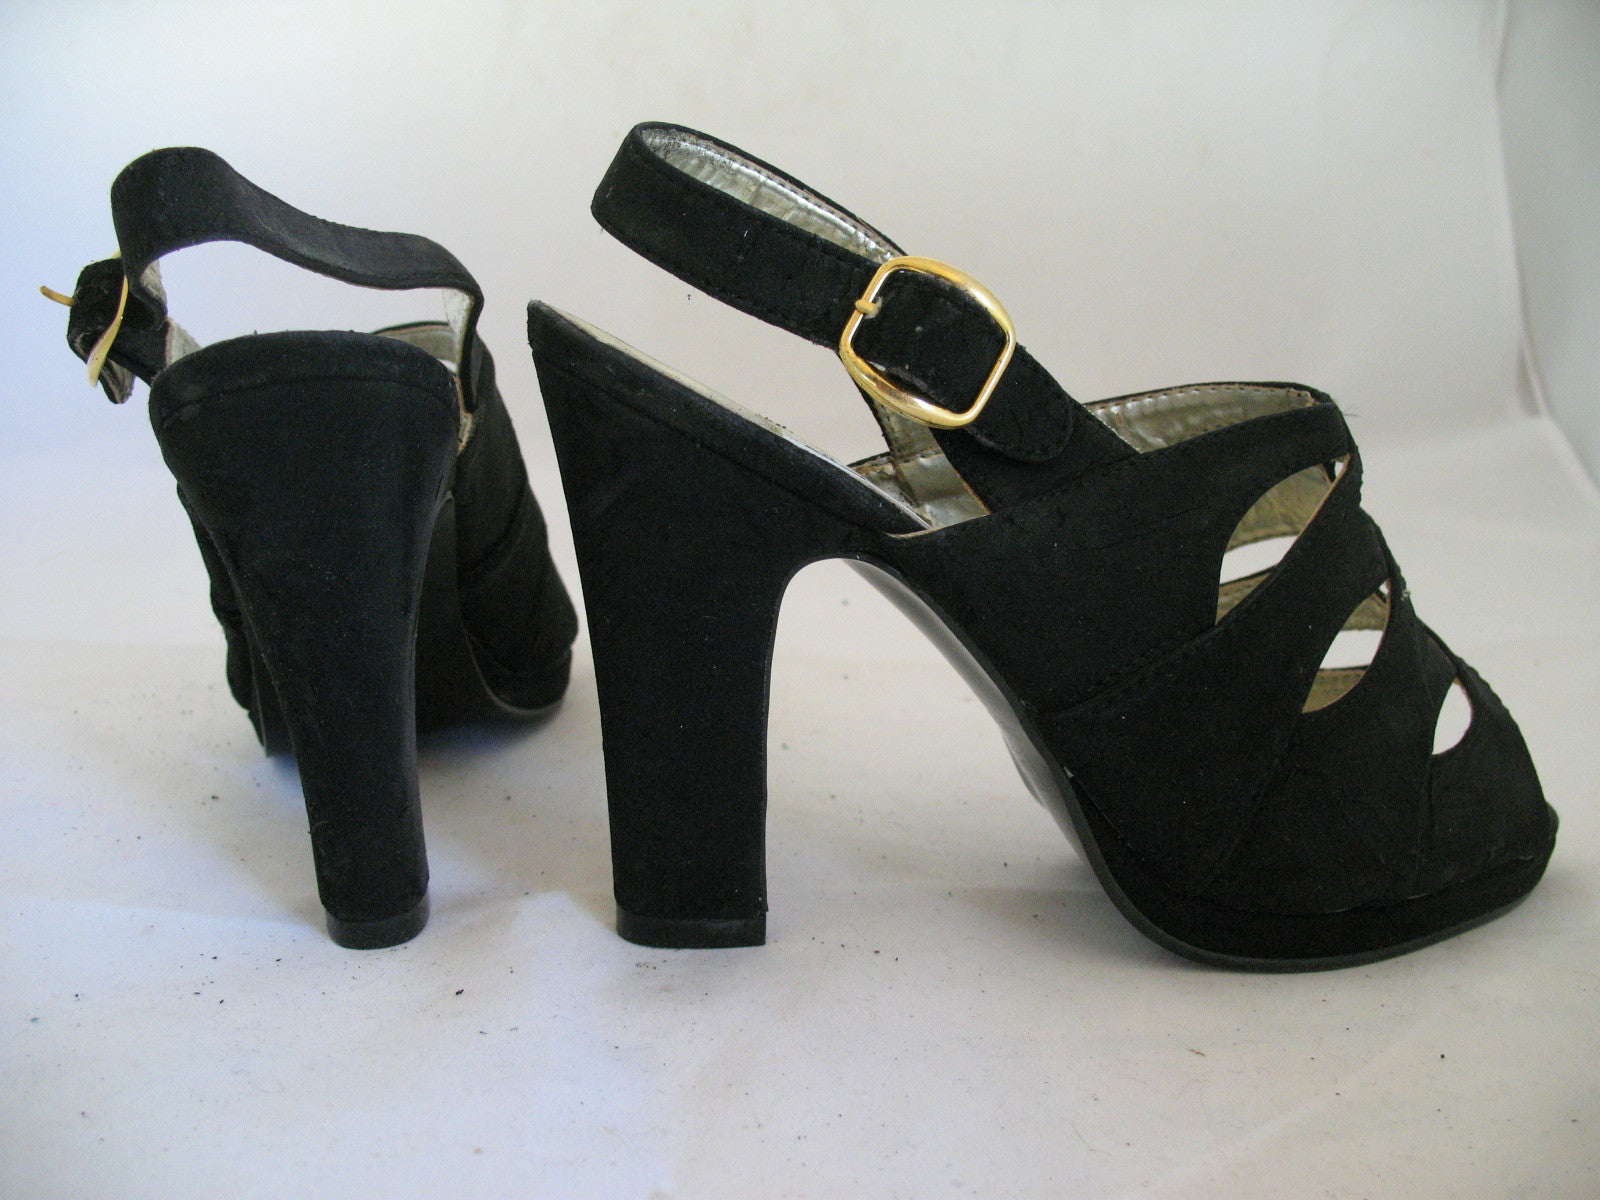 size 5 heel shoes